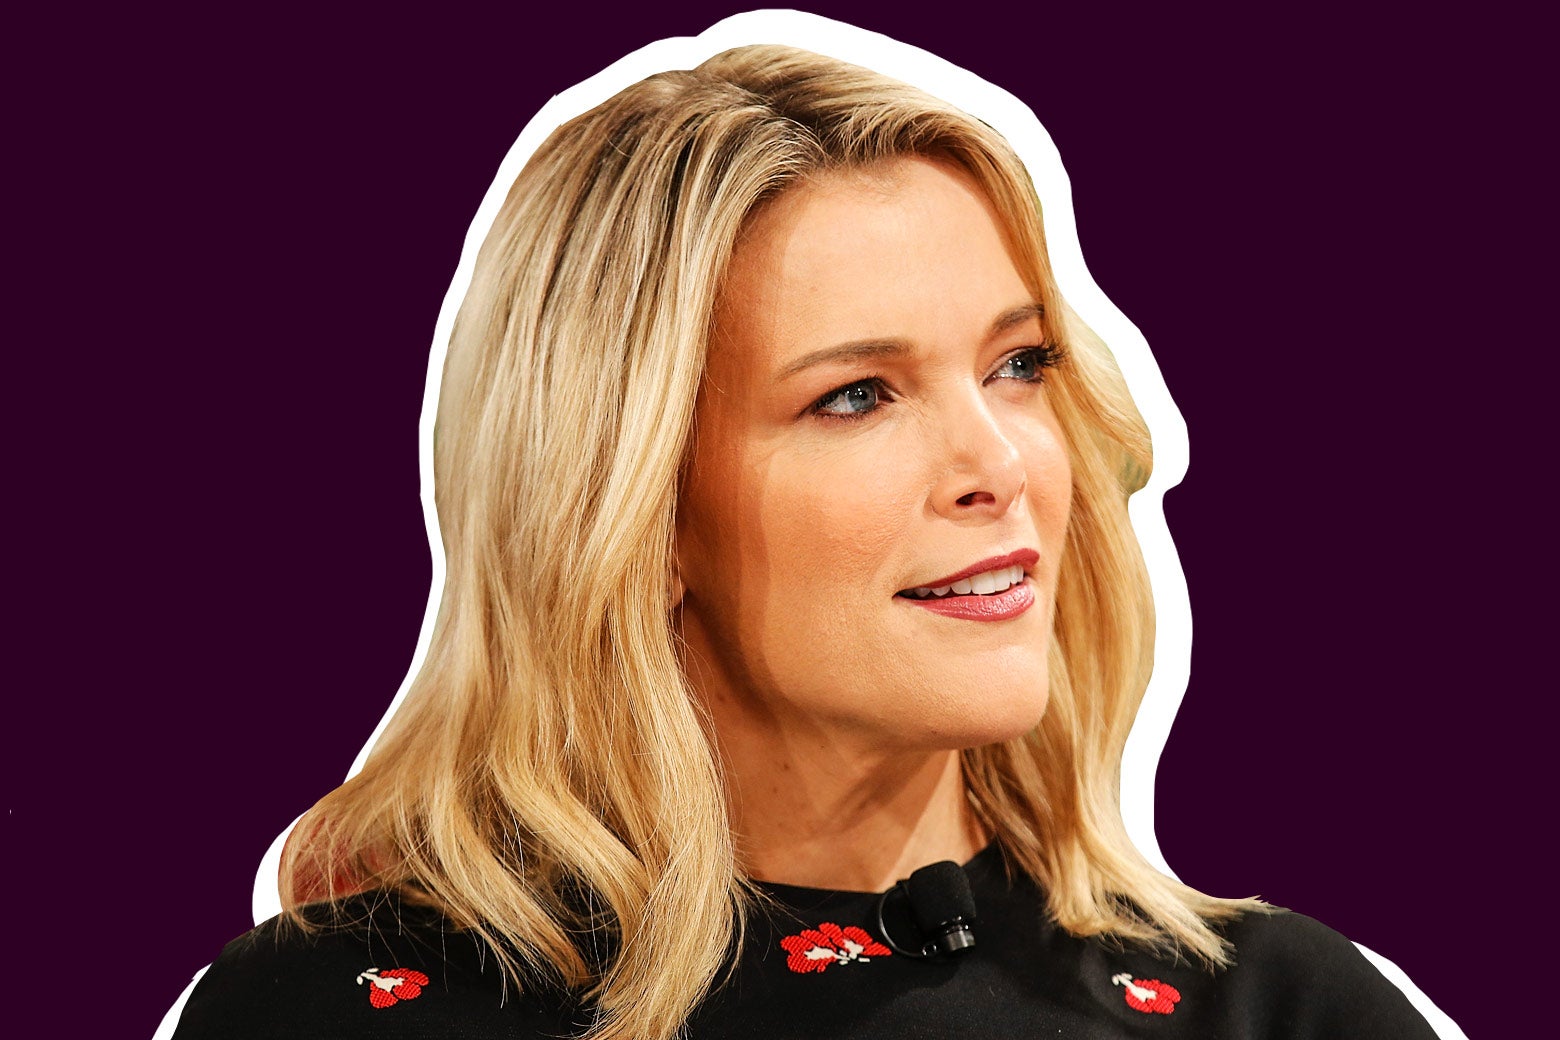 A cutout of blonde Megyn Kelly, looking off camera, set against a maroon background.